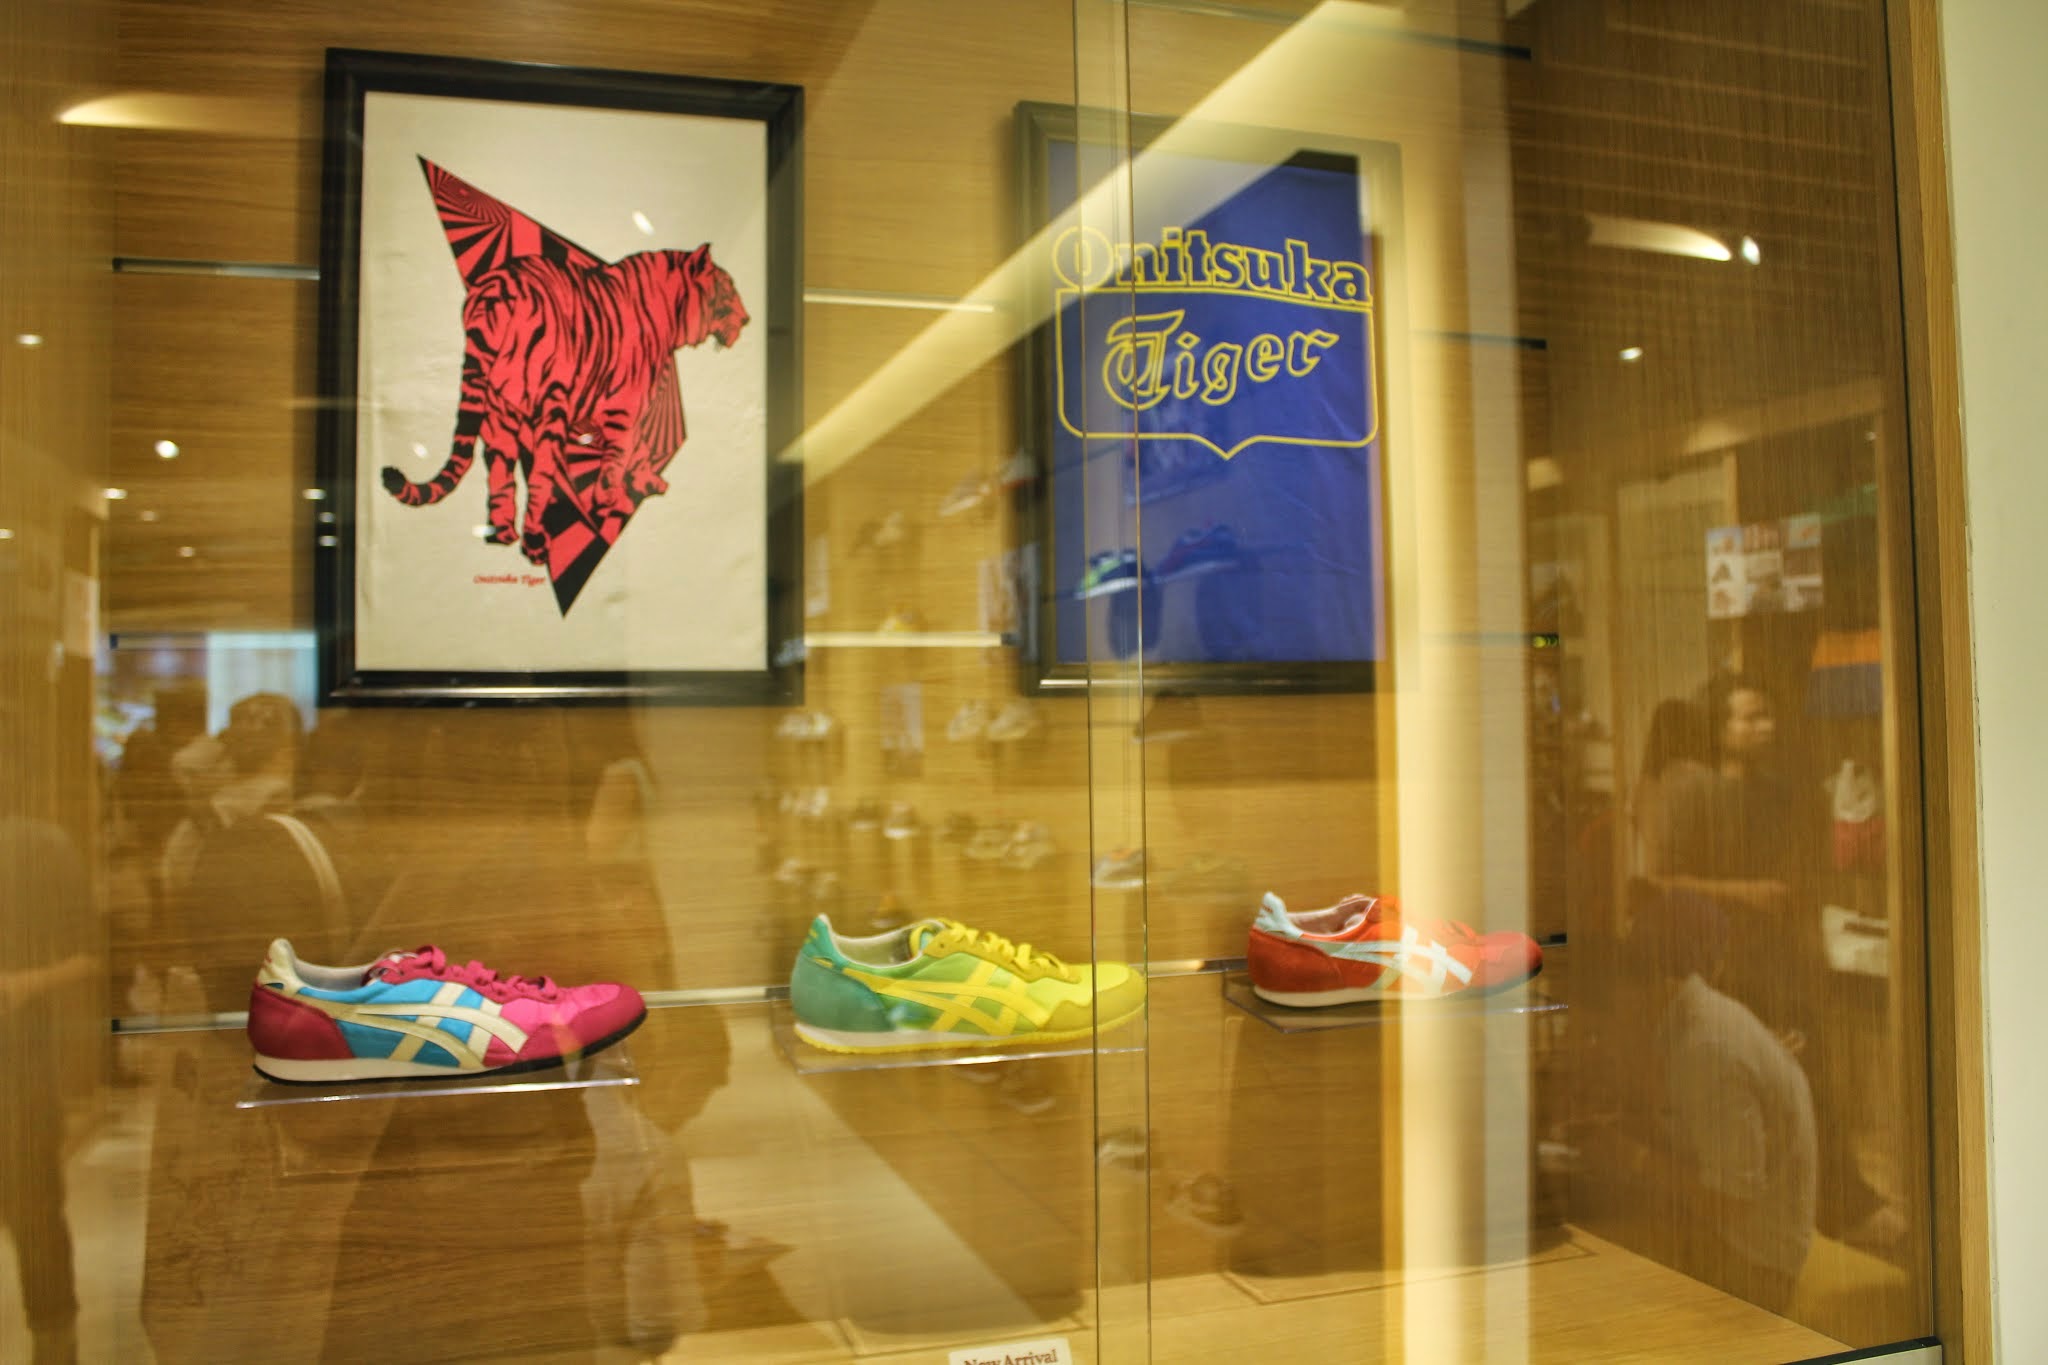 Onitsuka Tiger First Concept Store is Now Opening in Sunway Piramid, onitsuka tiger boutique malaysia, onitsuka tiger sunway pyramid,